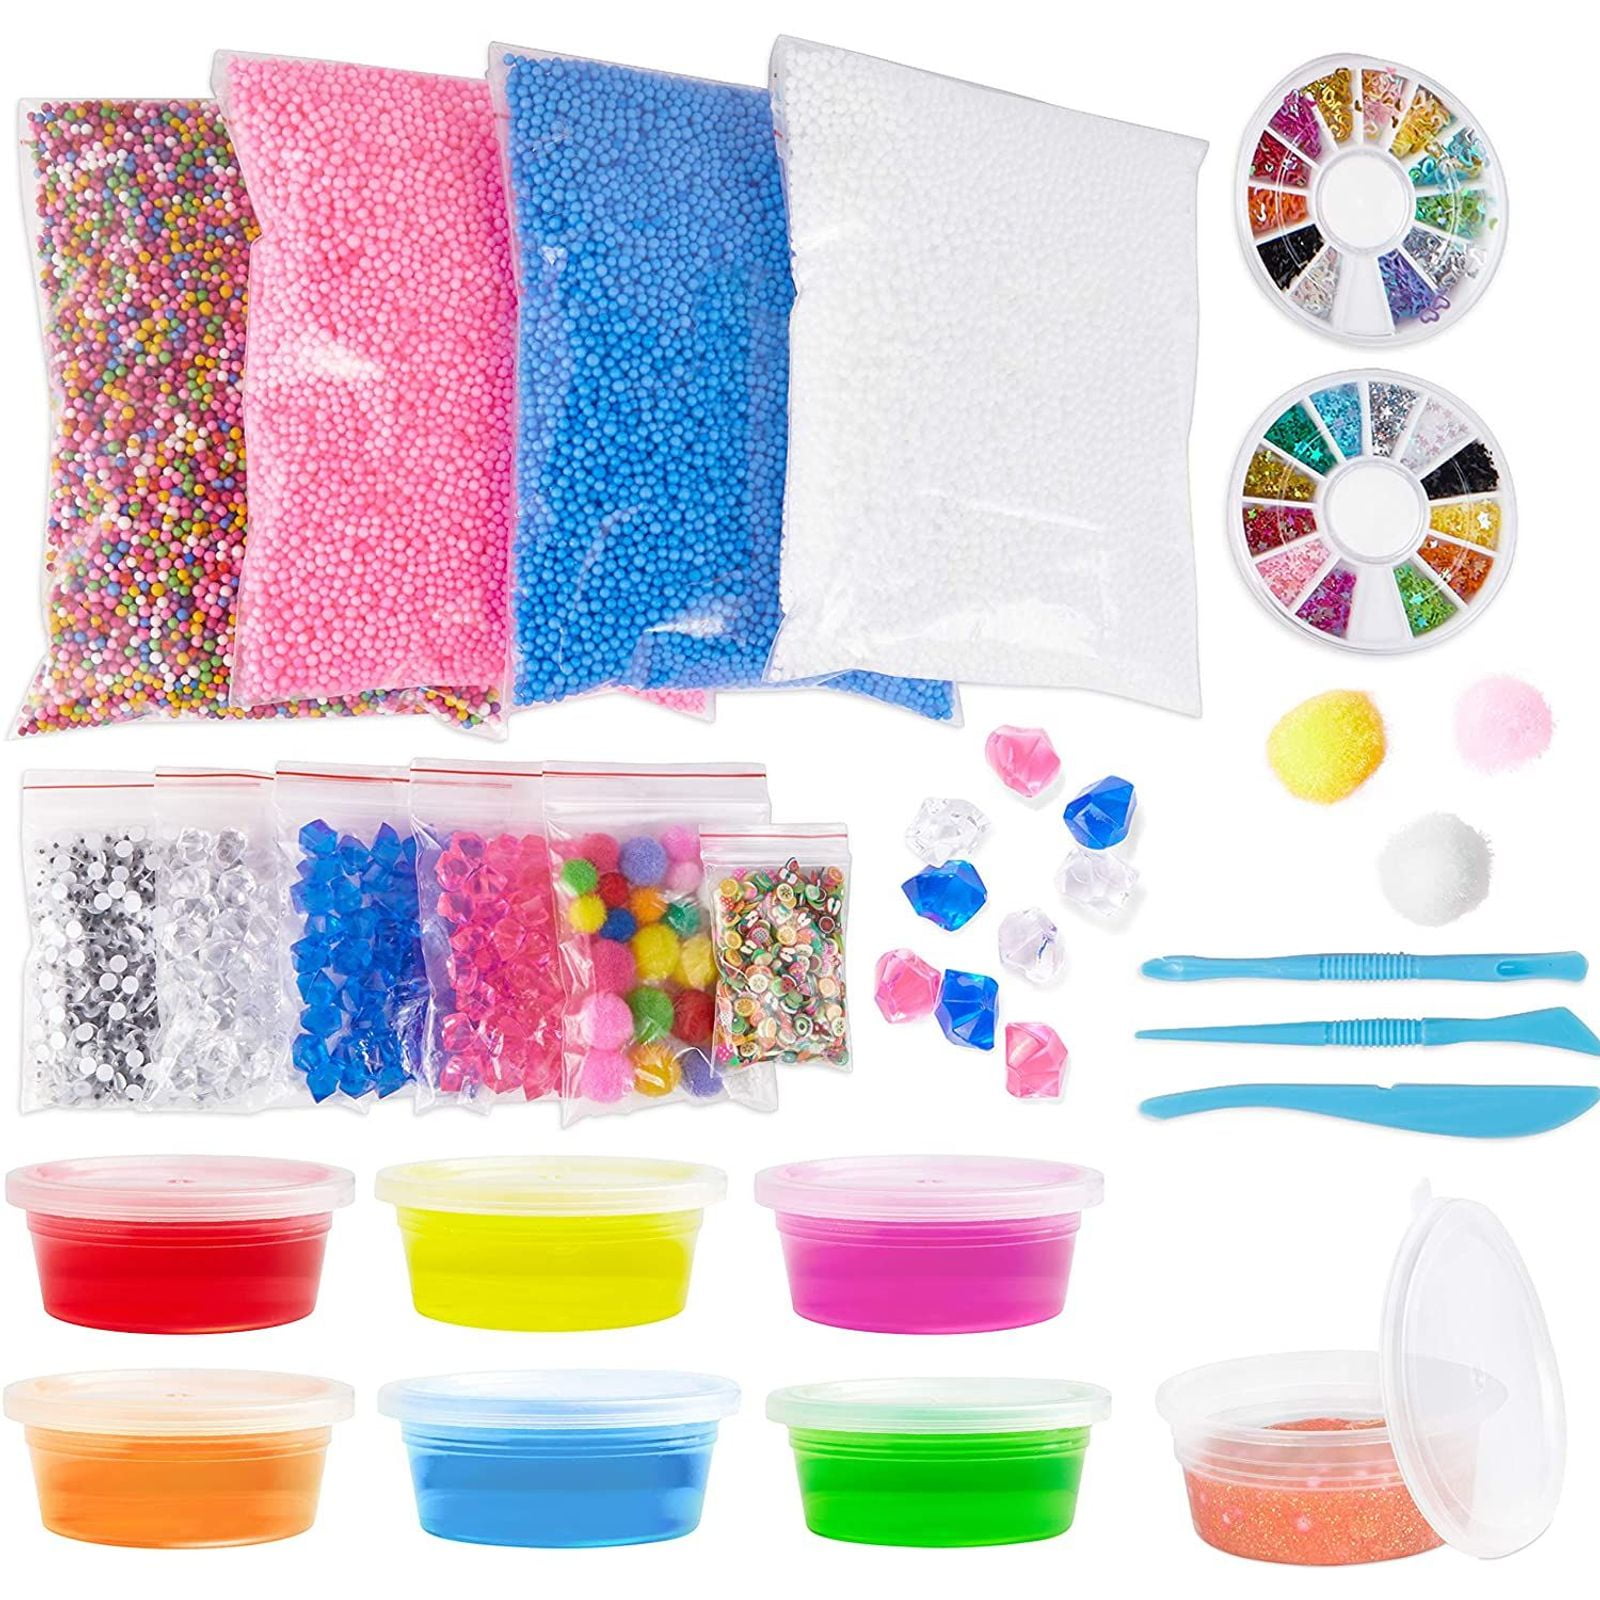 Foam Balls for DIY Slime, 11 Packs Styrofoam Decorative Slime Beads with Fruit Candy Slices and Tools for Homemade Slime Making, Arts & Crafts, Nail